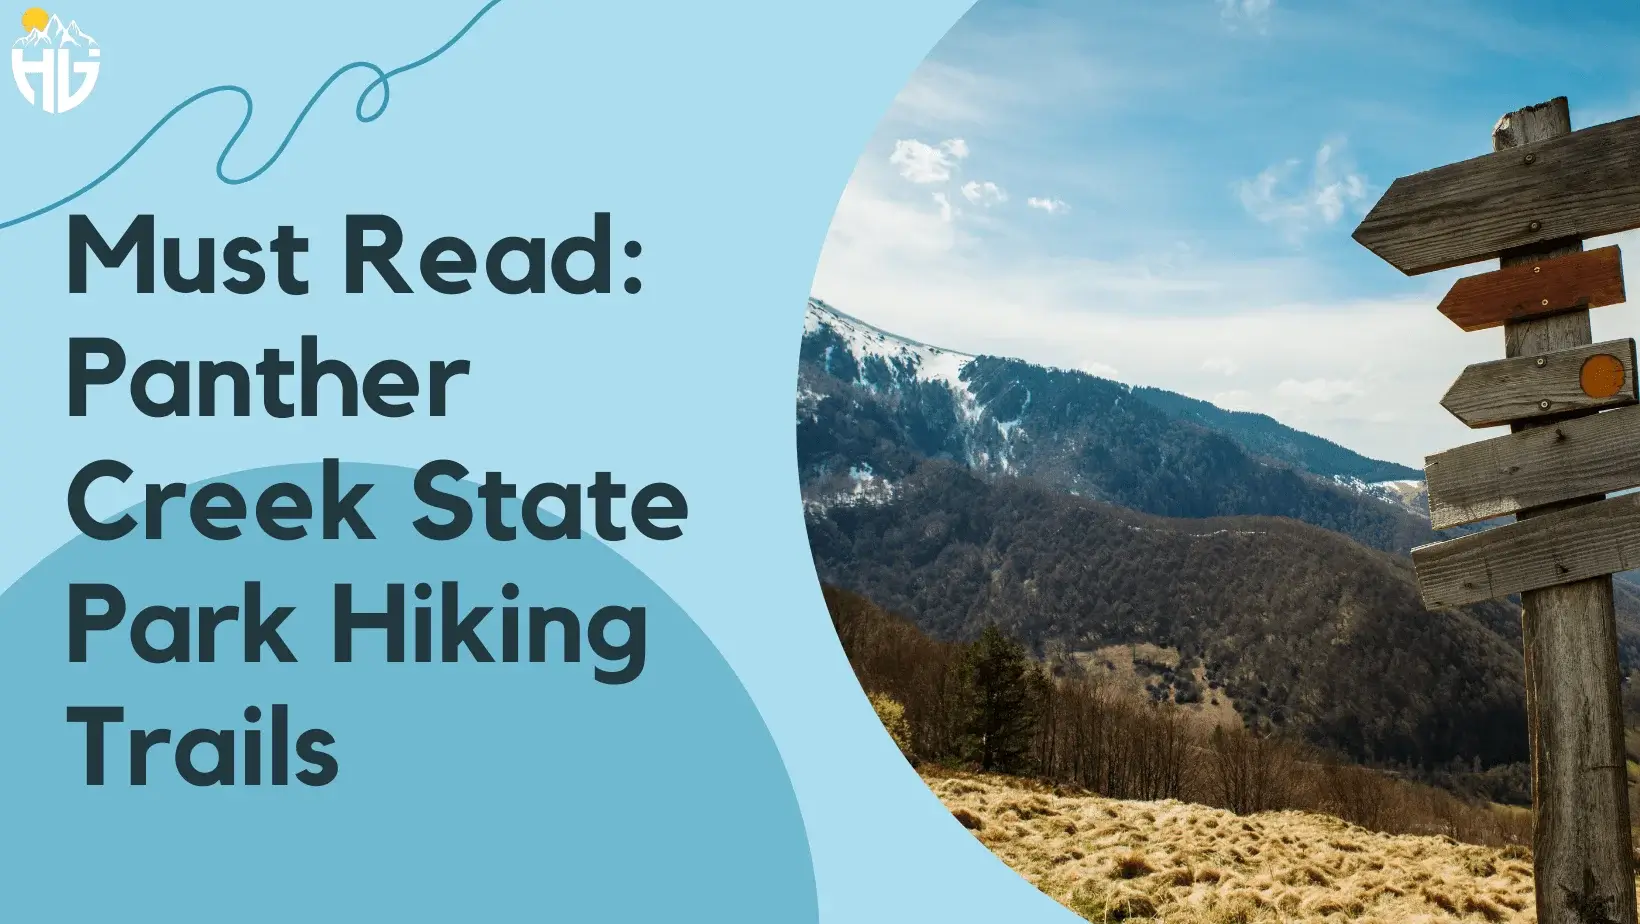 Must Read: Panther Creek State Park Hiking Trails